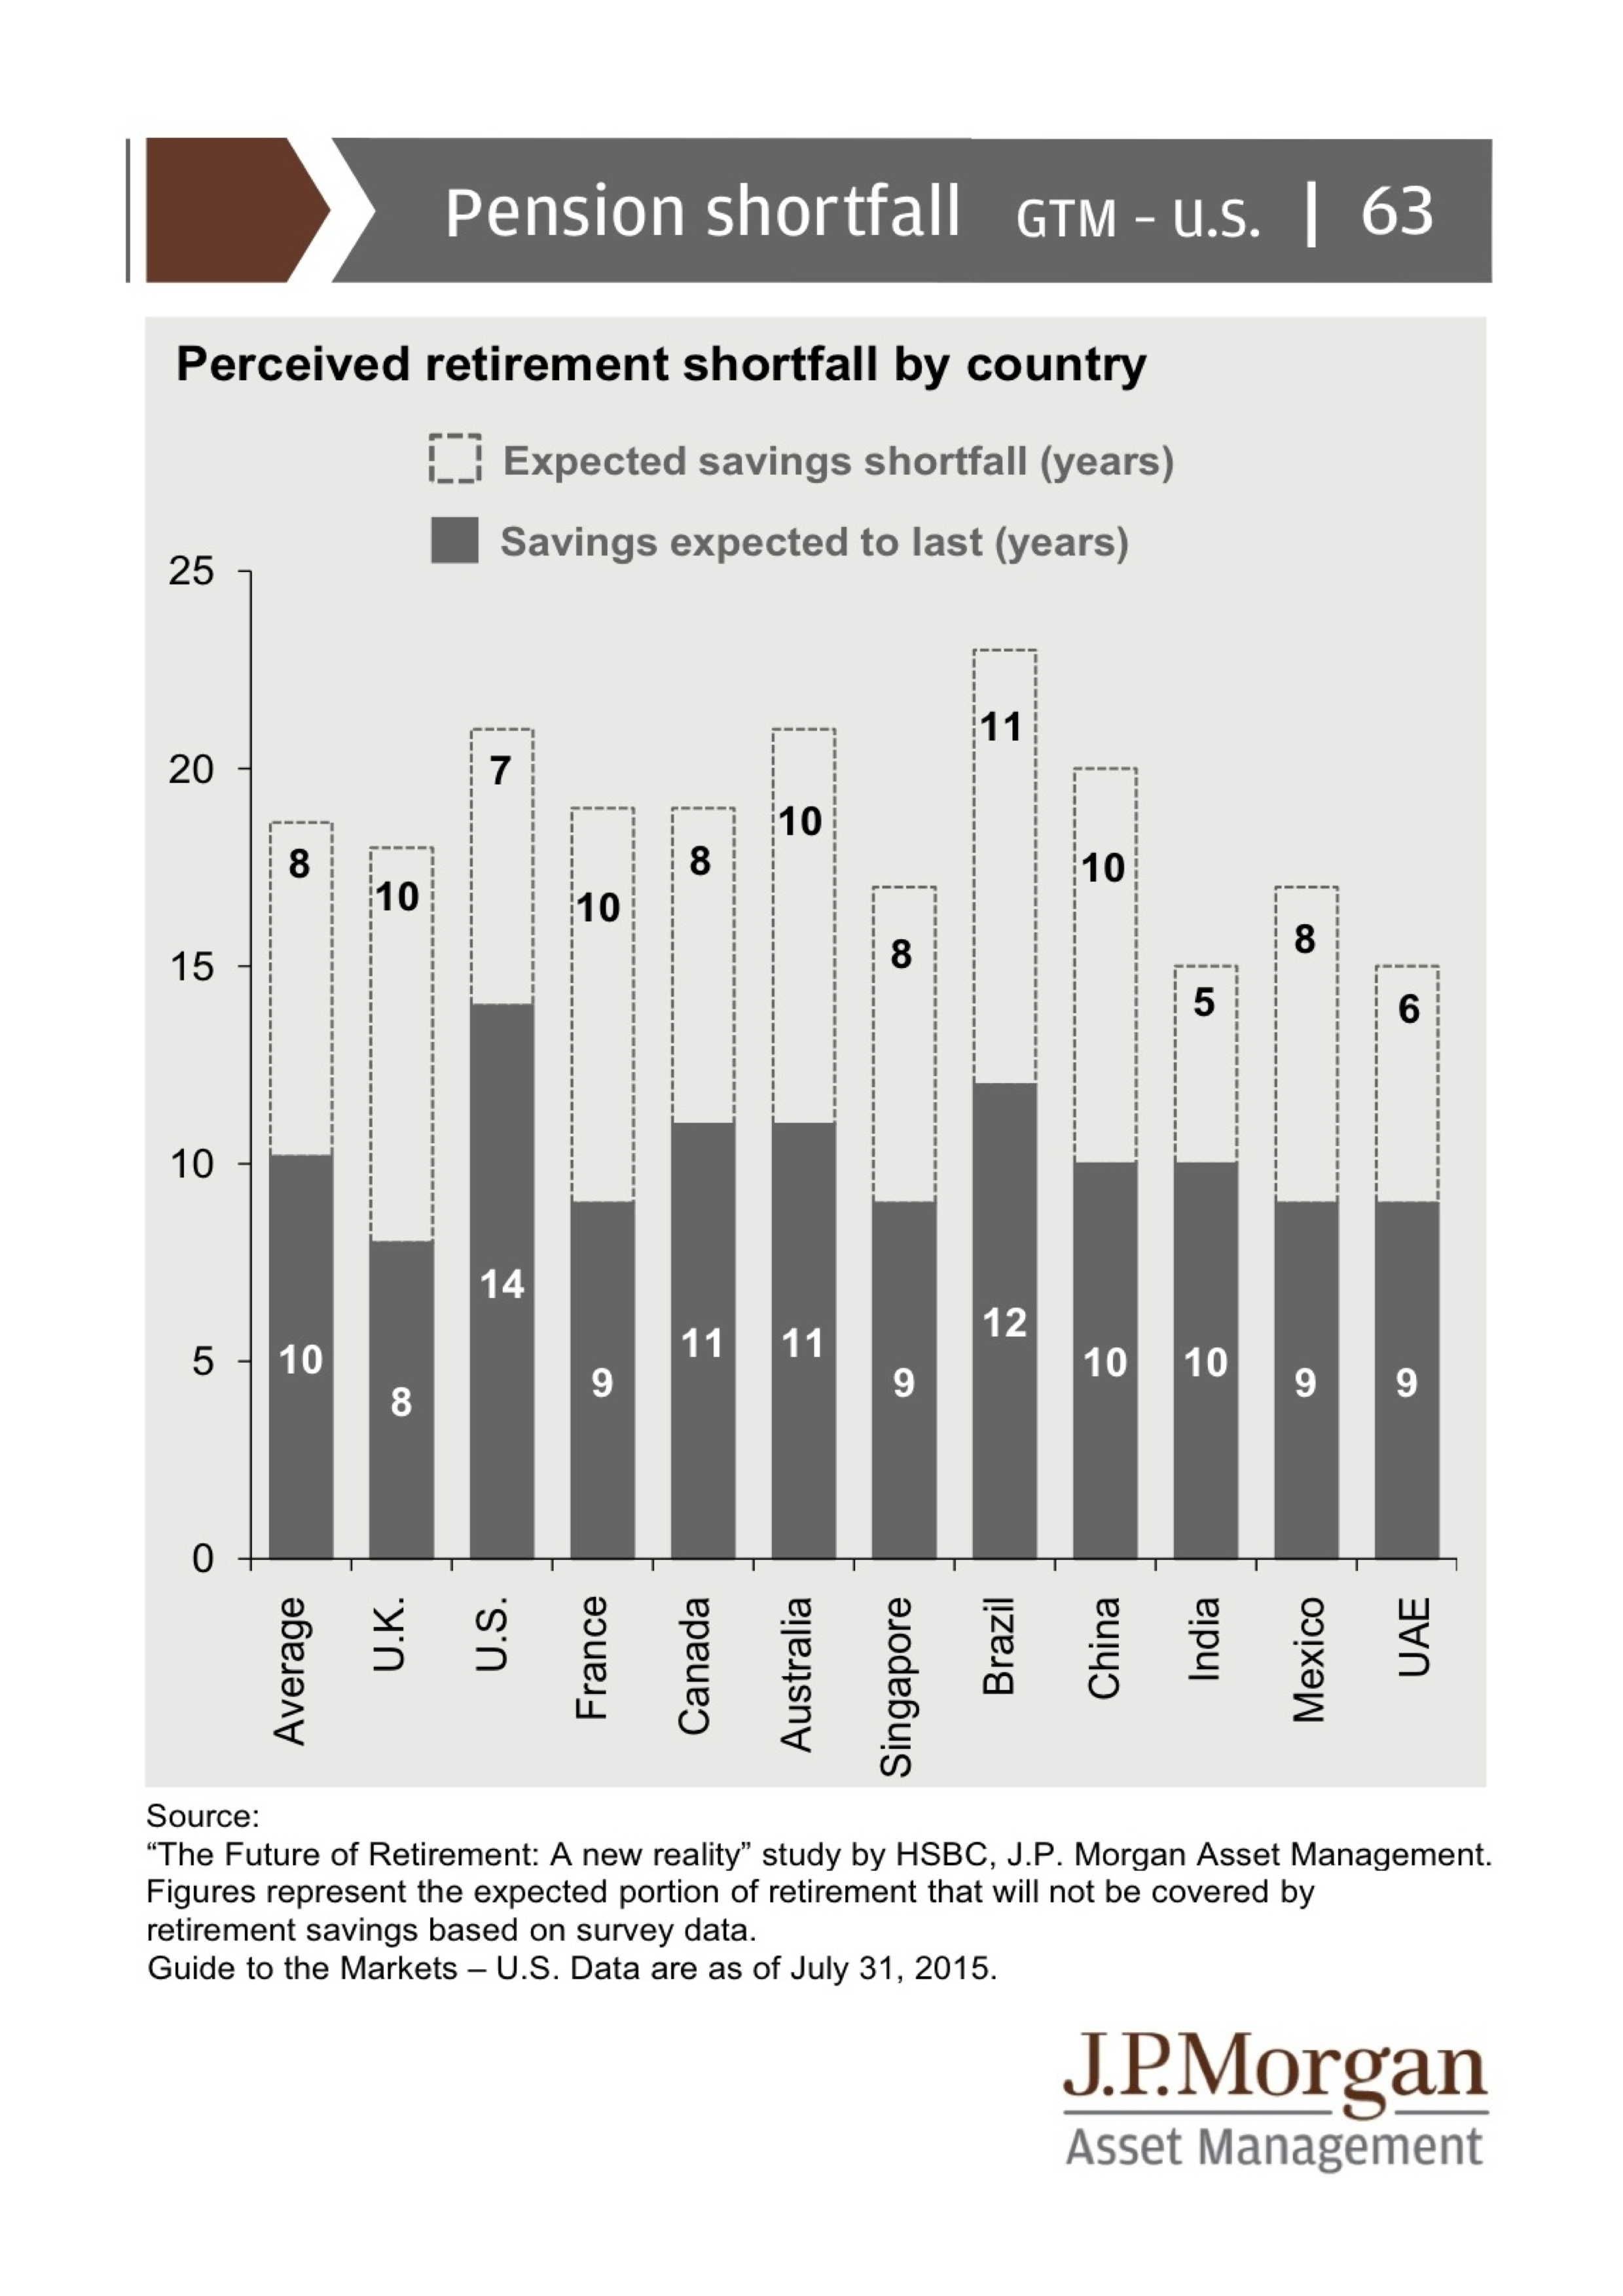 Perceived Retirement Shortfall by Country